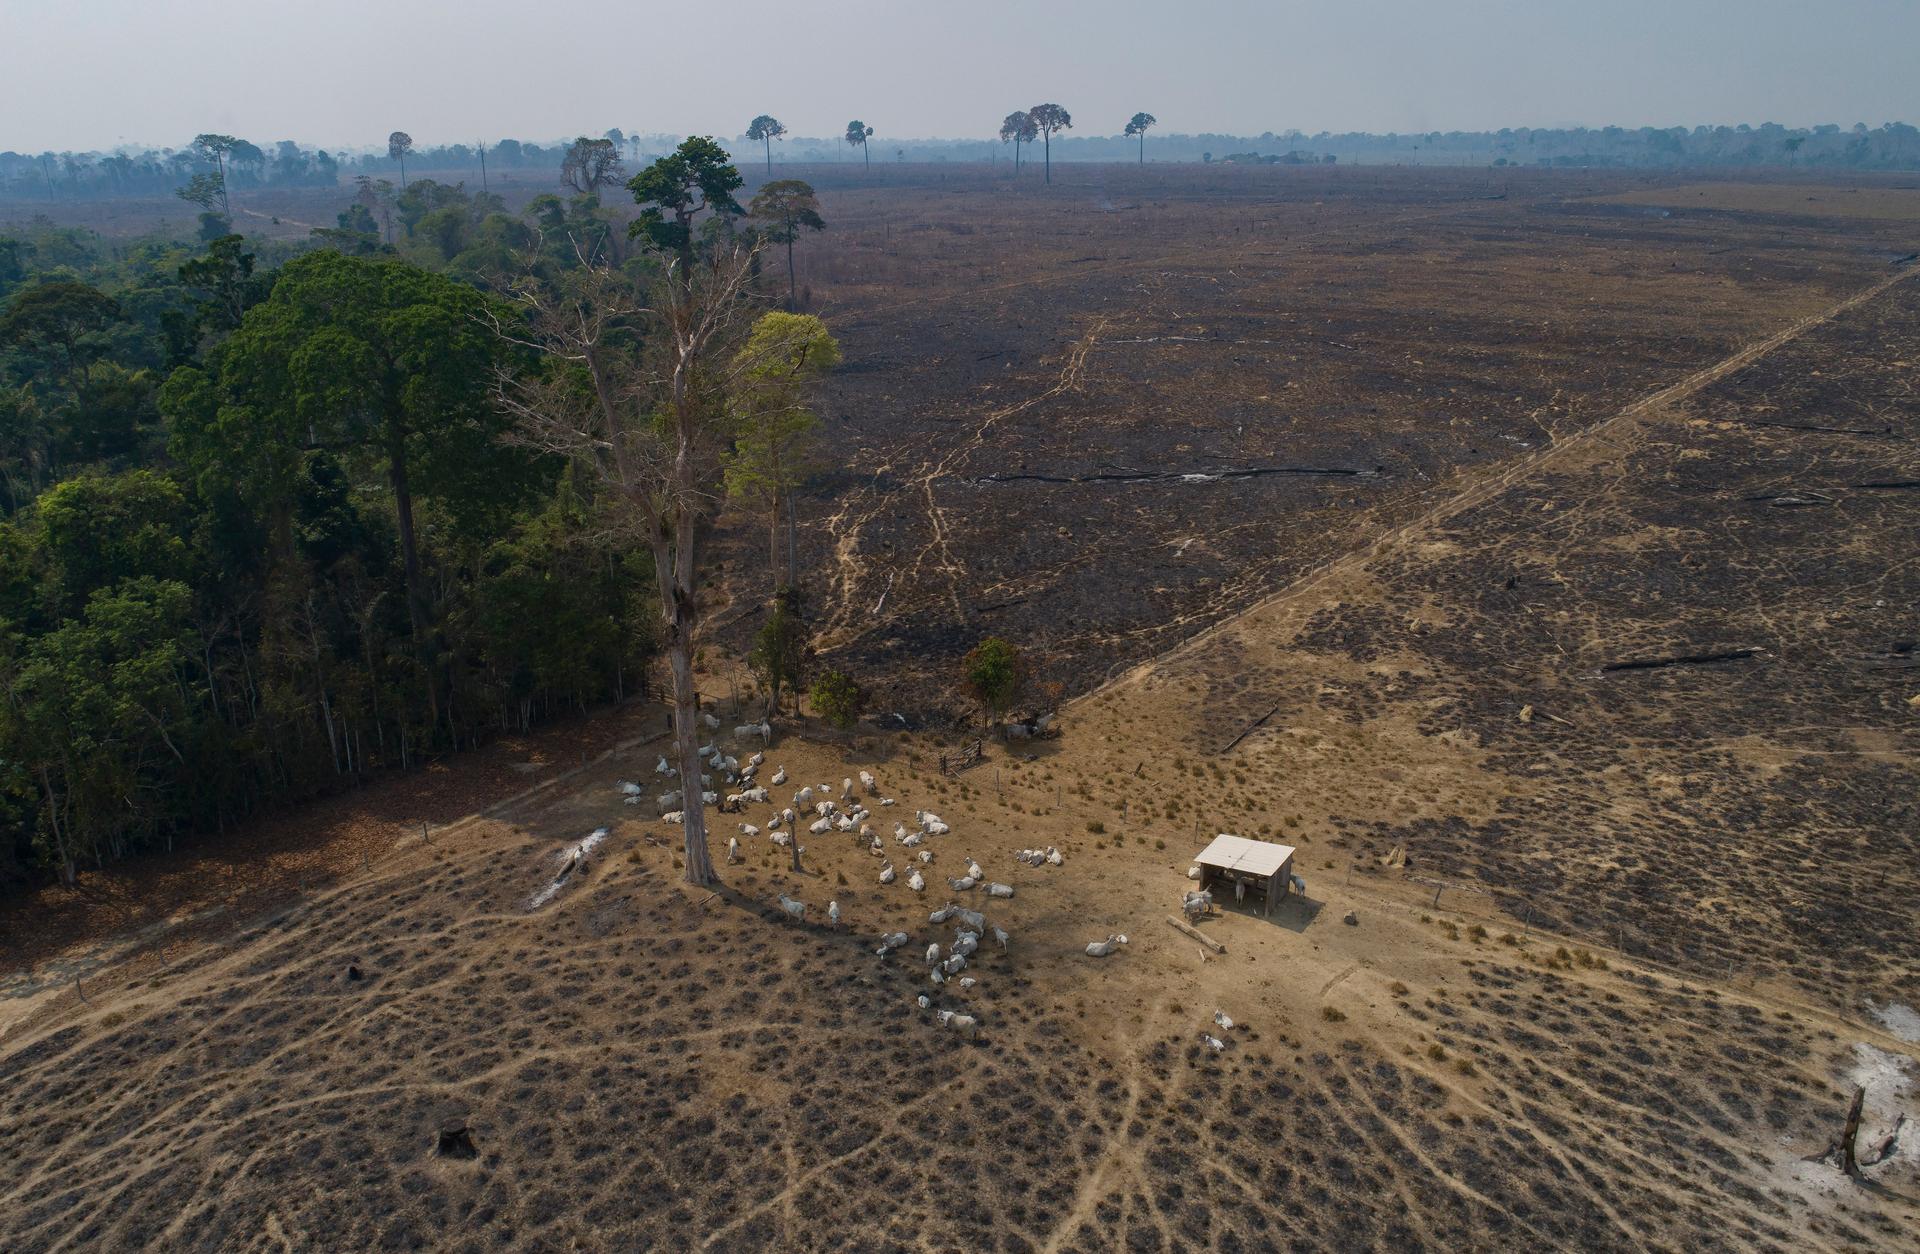 Cattle graze on land recently burned and deforested by cattle farmers near Novo Progresso, Para state, Brazil.